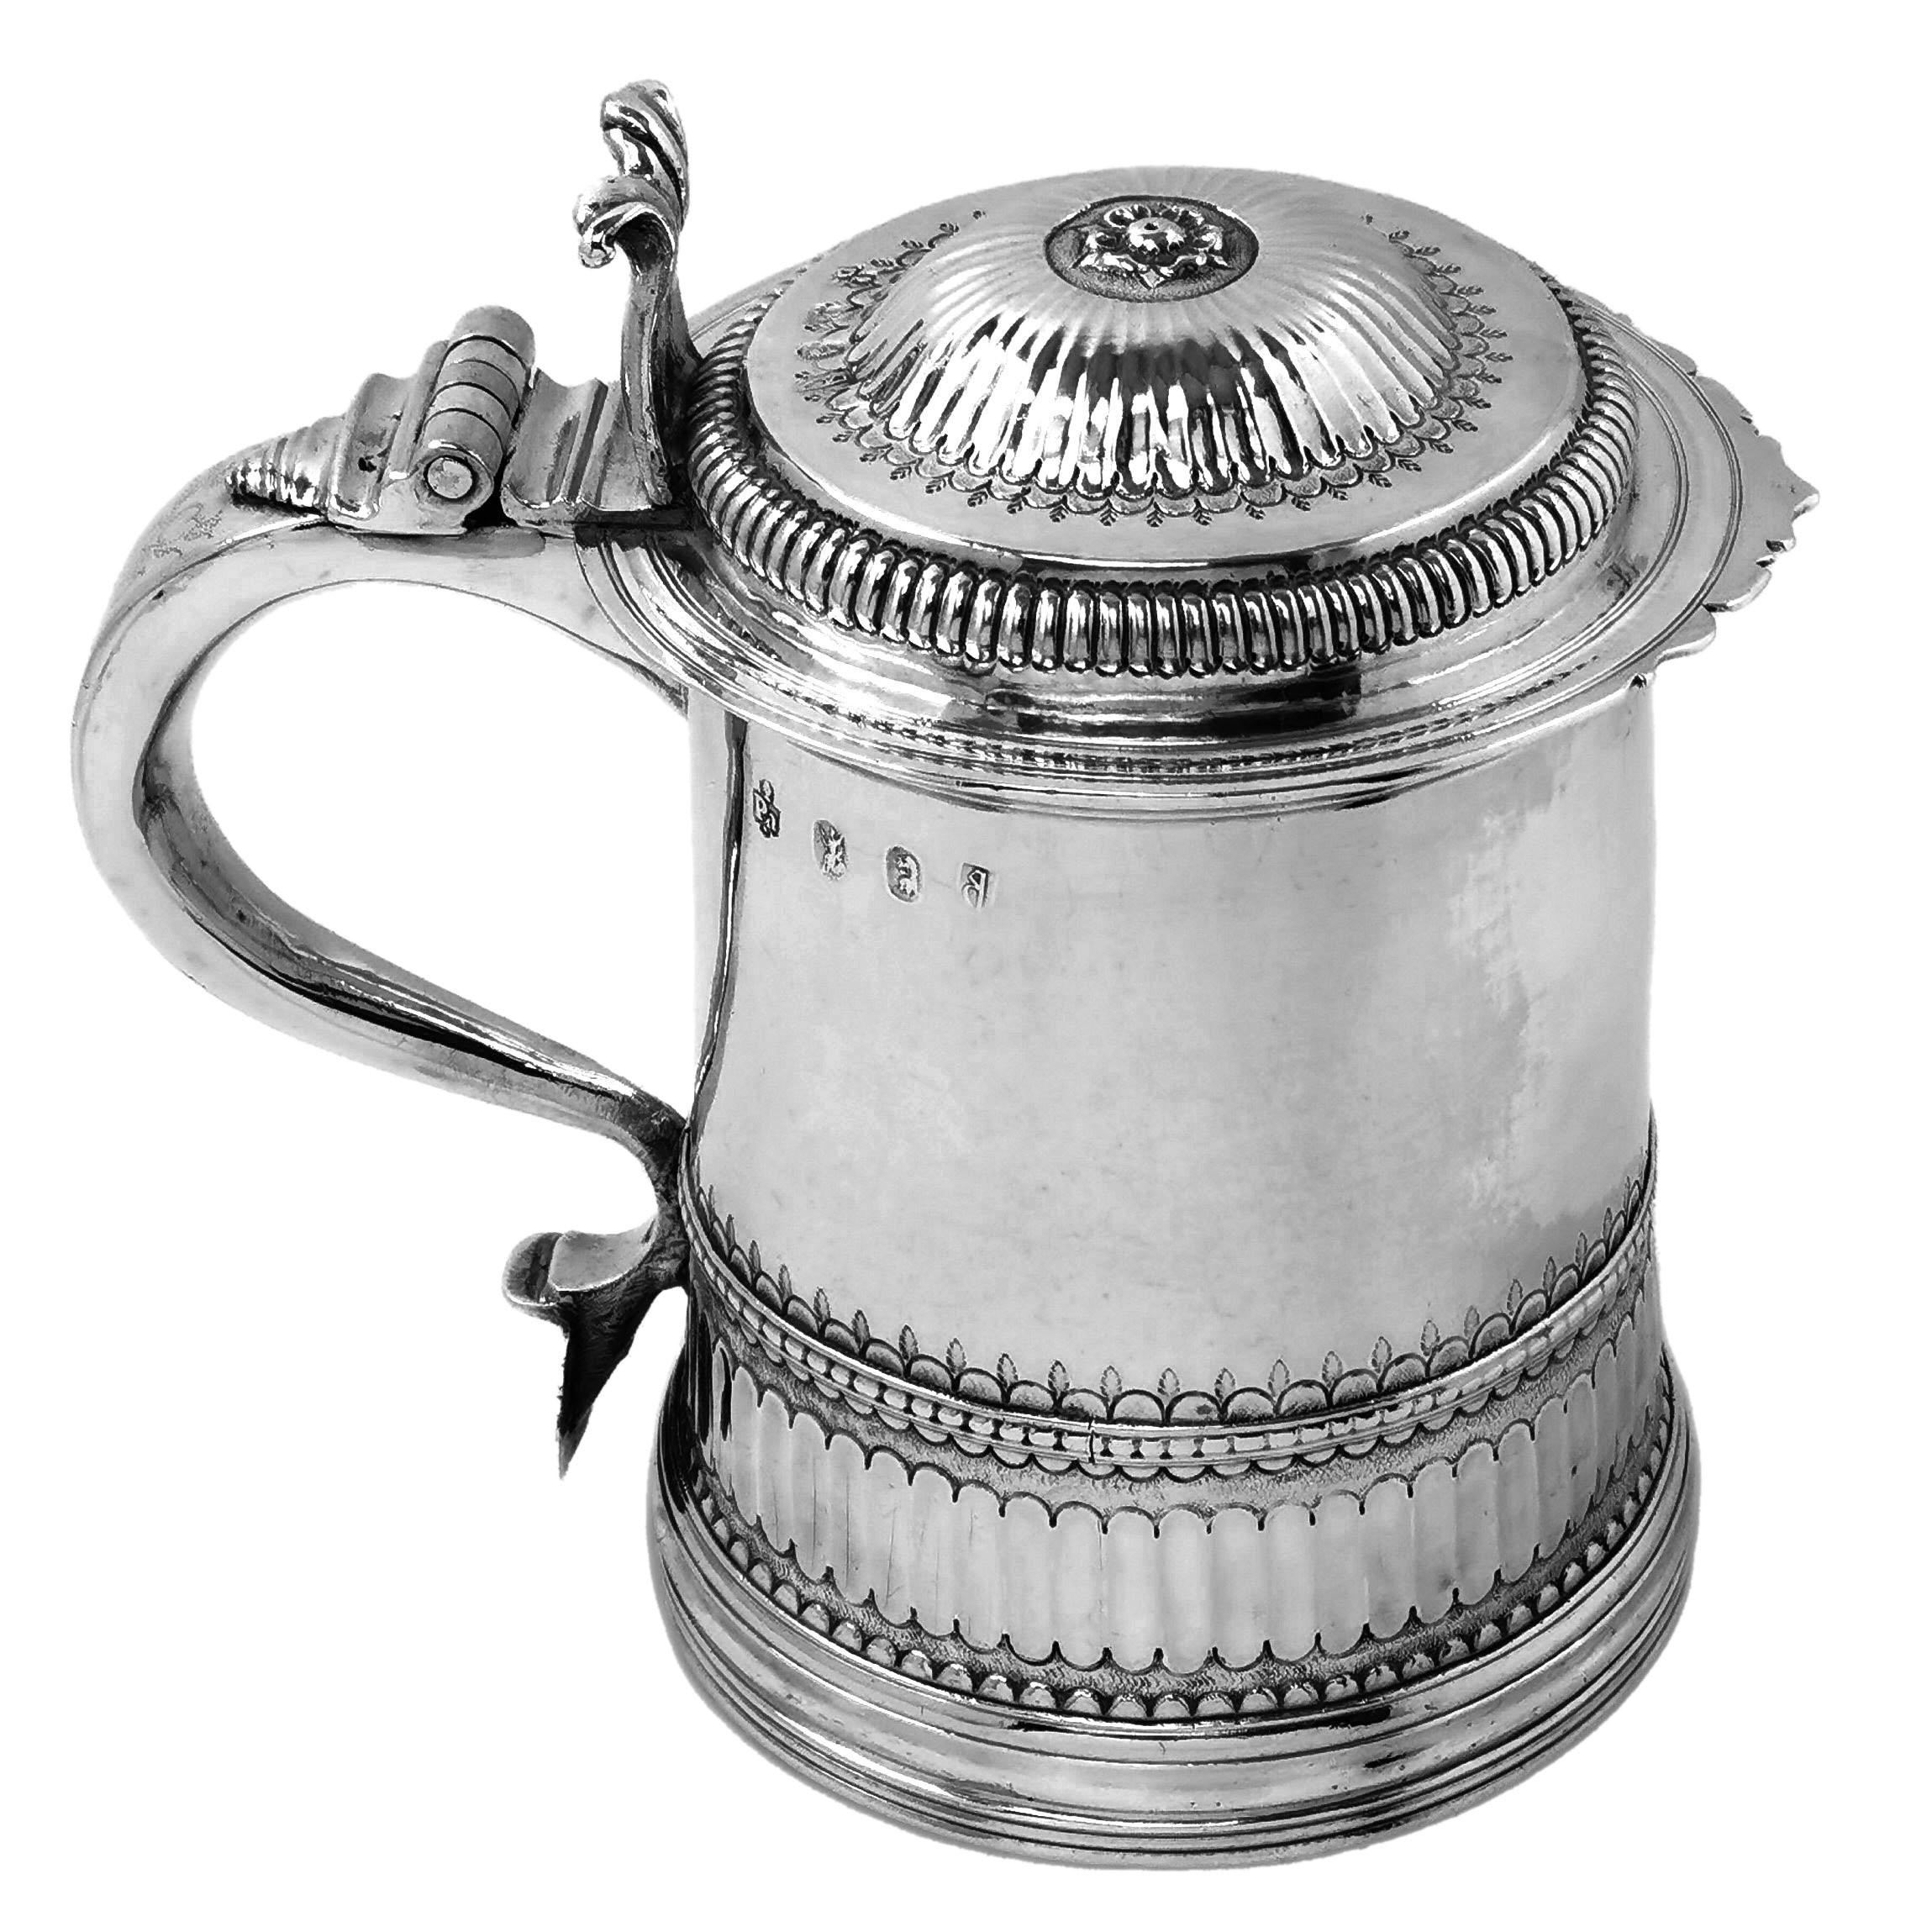 An impressive Antique Queen Anne Solid Silver Tankard with an elegant flued band around the body and a complementary fluted design on the domed lid. The chased design elements are enhanced by subtle engraved elements. The Tankard has a substantial